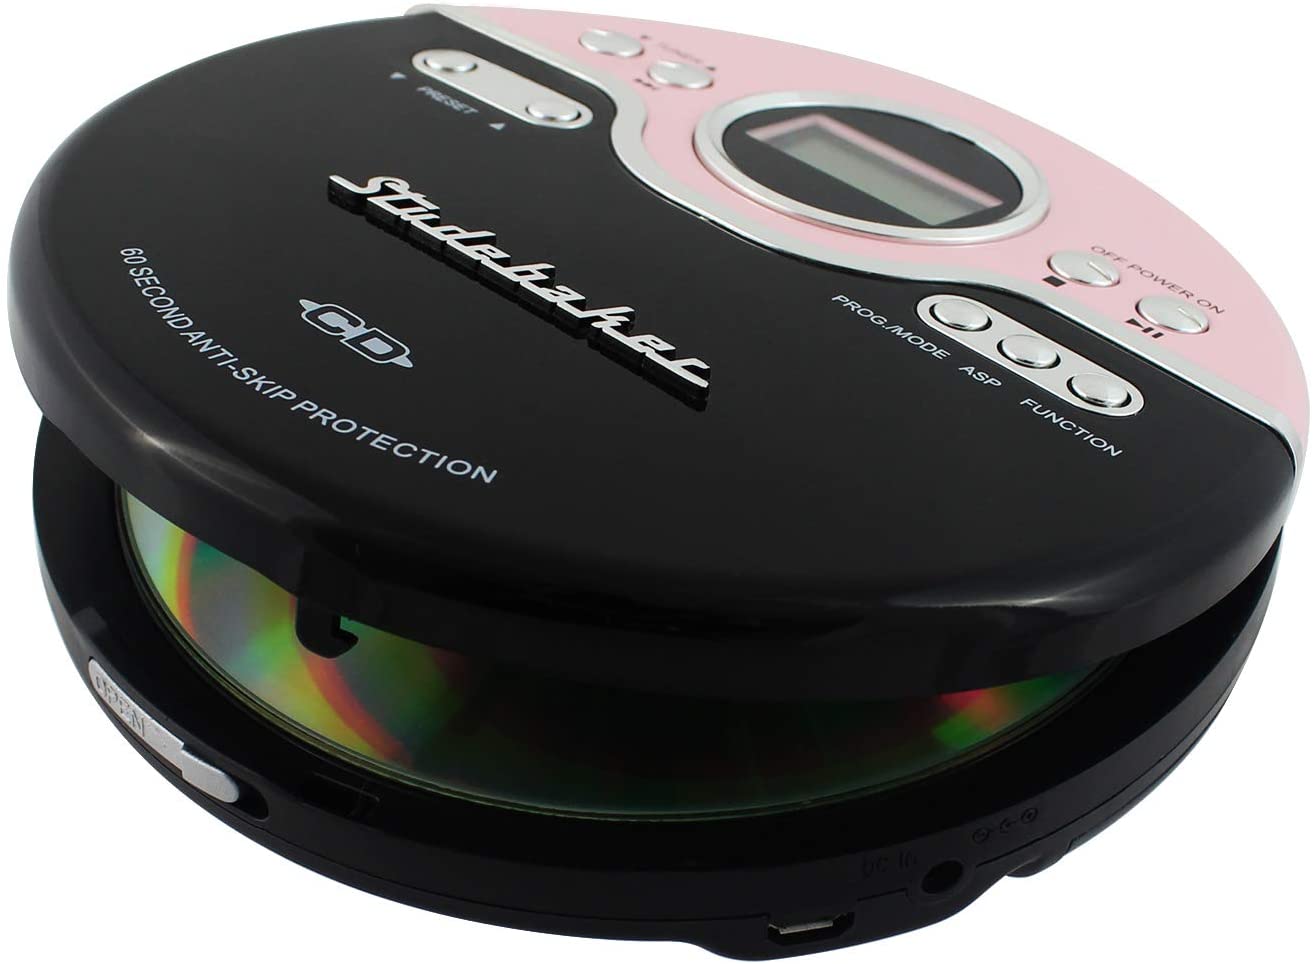 Studebaker SB3703PB Joggable Personal CD Player - FM - Bass Boost (Pink/Black)  [MISC ACCESSORY] Black, Pink - image 3 of 3